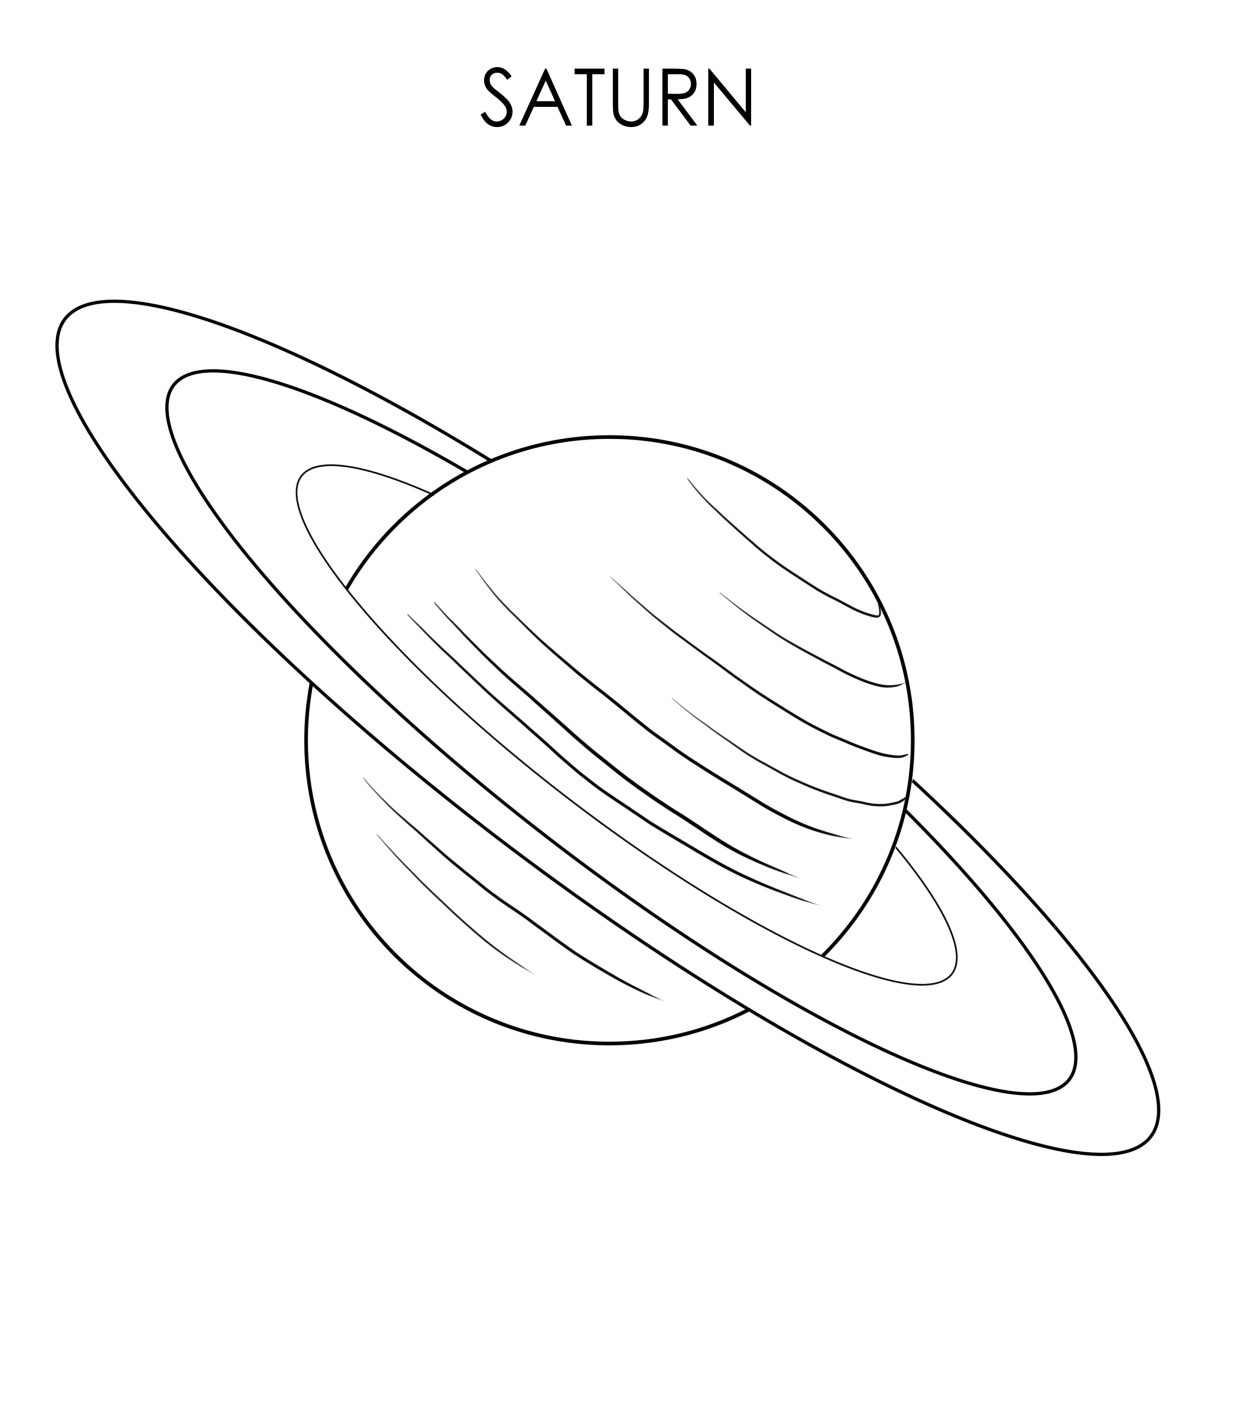 Printable Saturn Coloring Pages Free For Kids And Adults